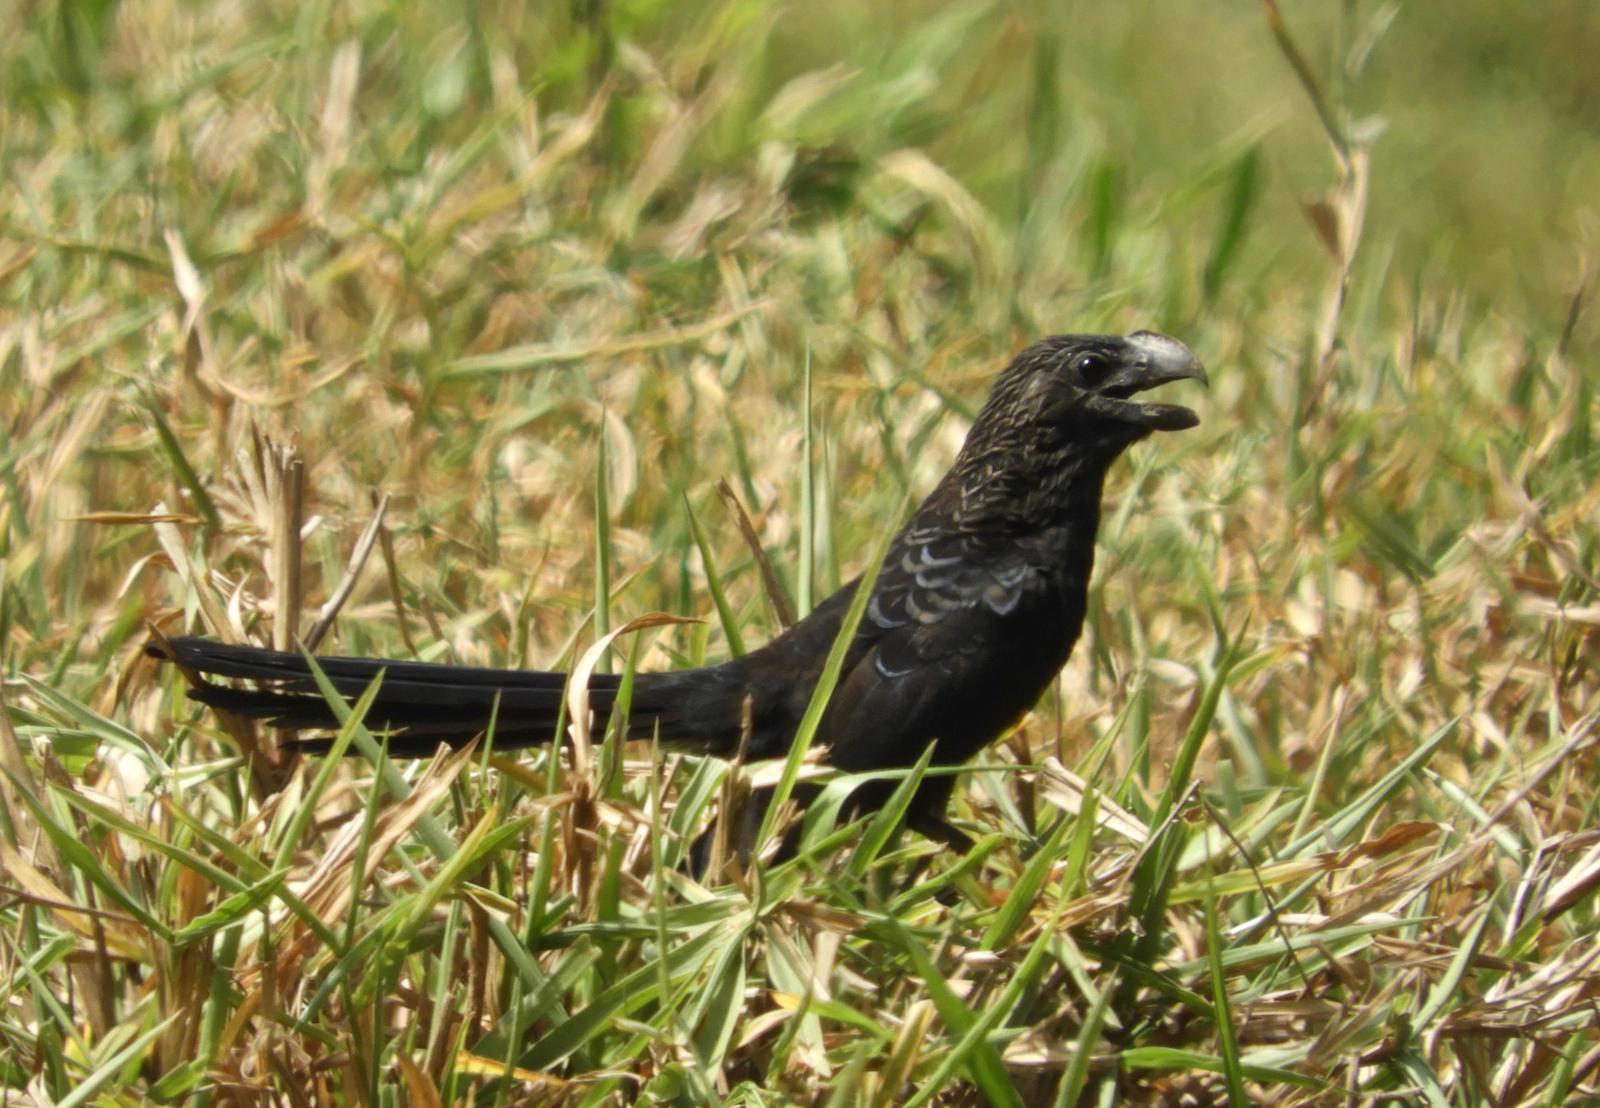 Smooth-billed Ani Photo by Yvonne Burch-Hartley